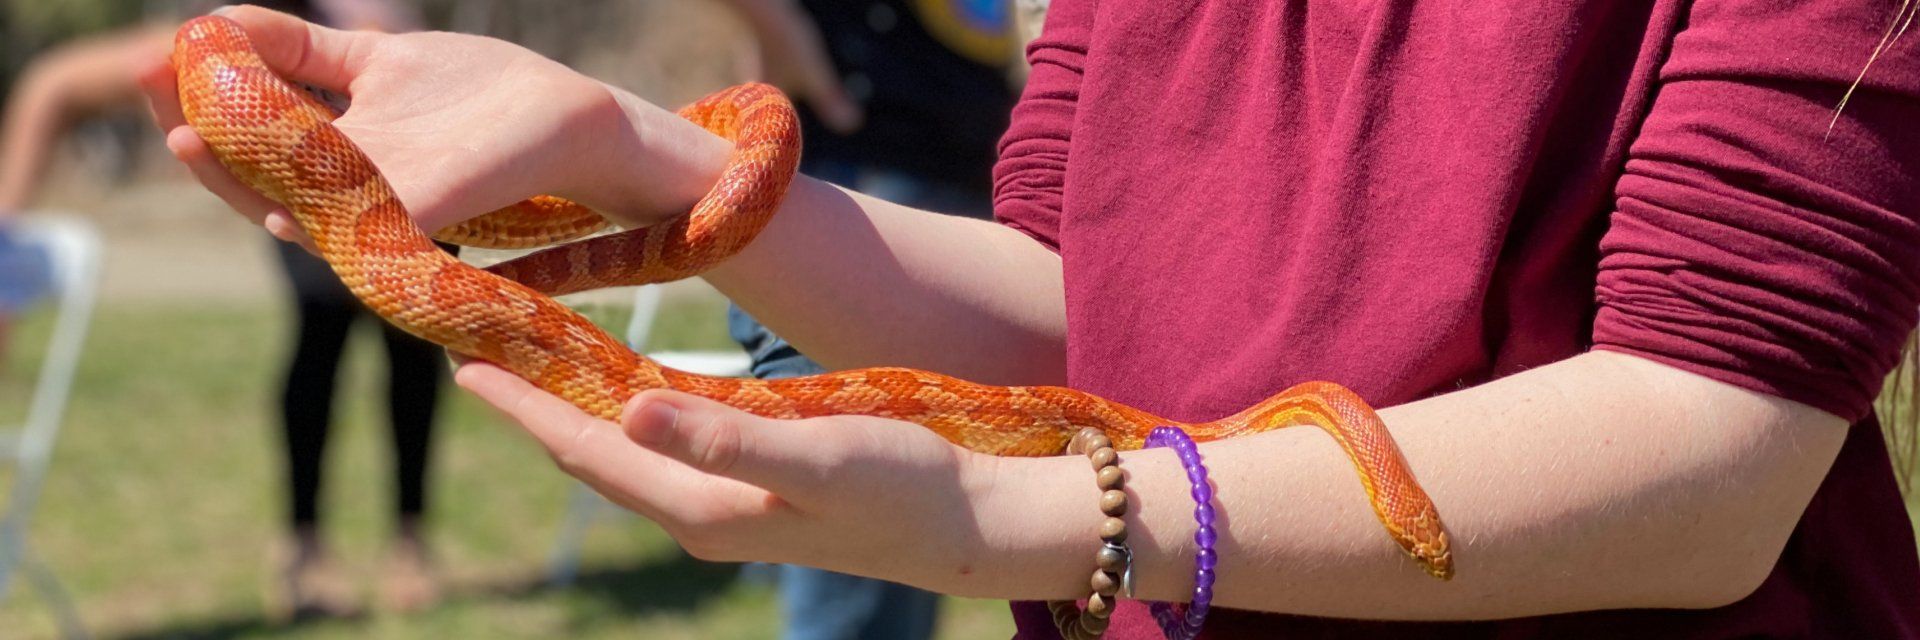 Adolescent student holding an orange and red snake